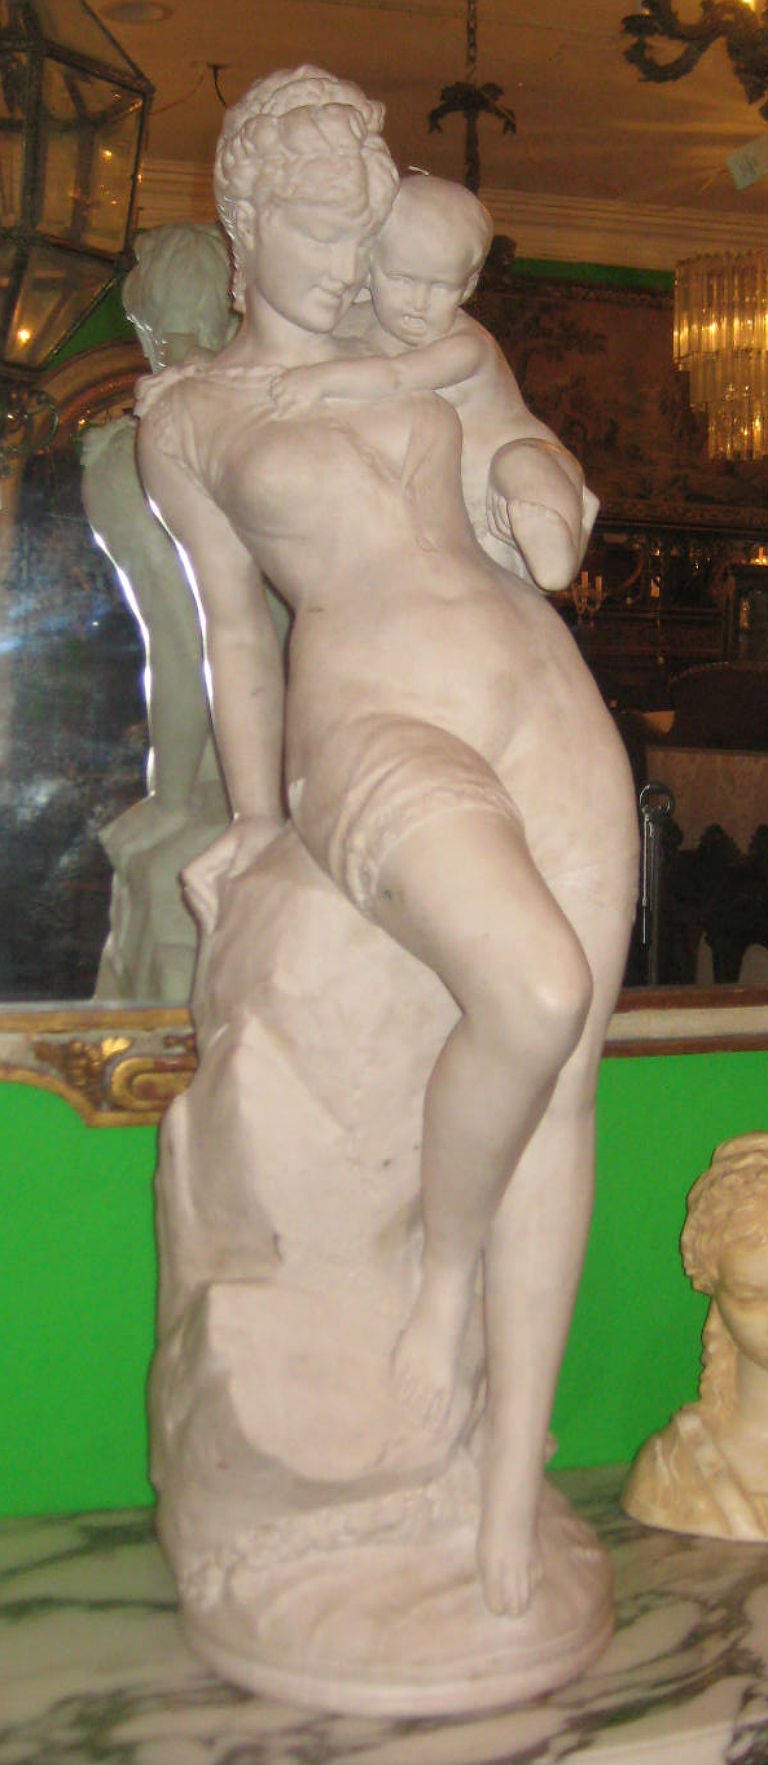 Large cultured (composite) marble sculpture of mother and child.

After 43 years of business we are retiring. Everything must be sold. Many of the pieces listed here on 1stdibs represent markdowns below our cost. We thank everyone for their